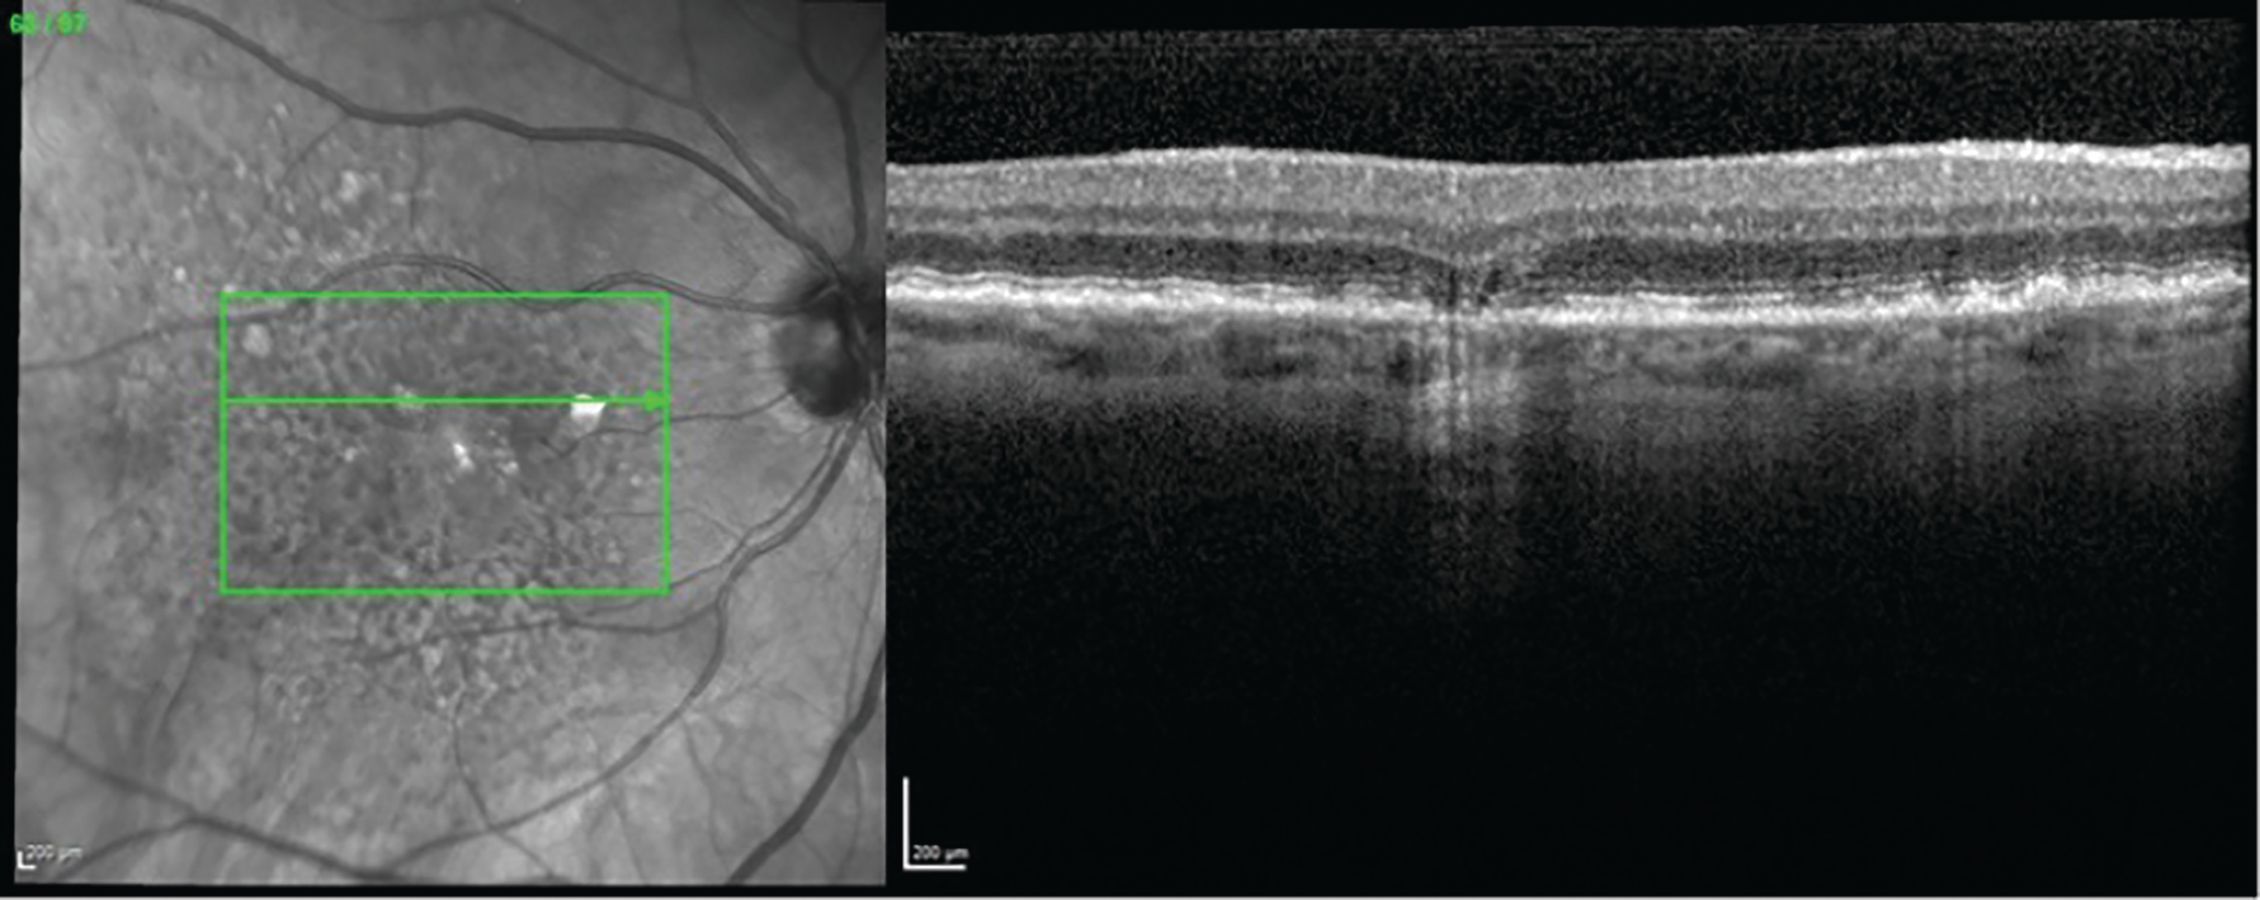 Figure 1. Incomplete retinal pigment epithelium (RPE) and outer retinal atrophy (iRORA).